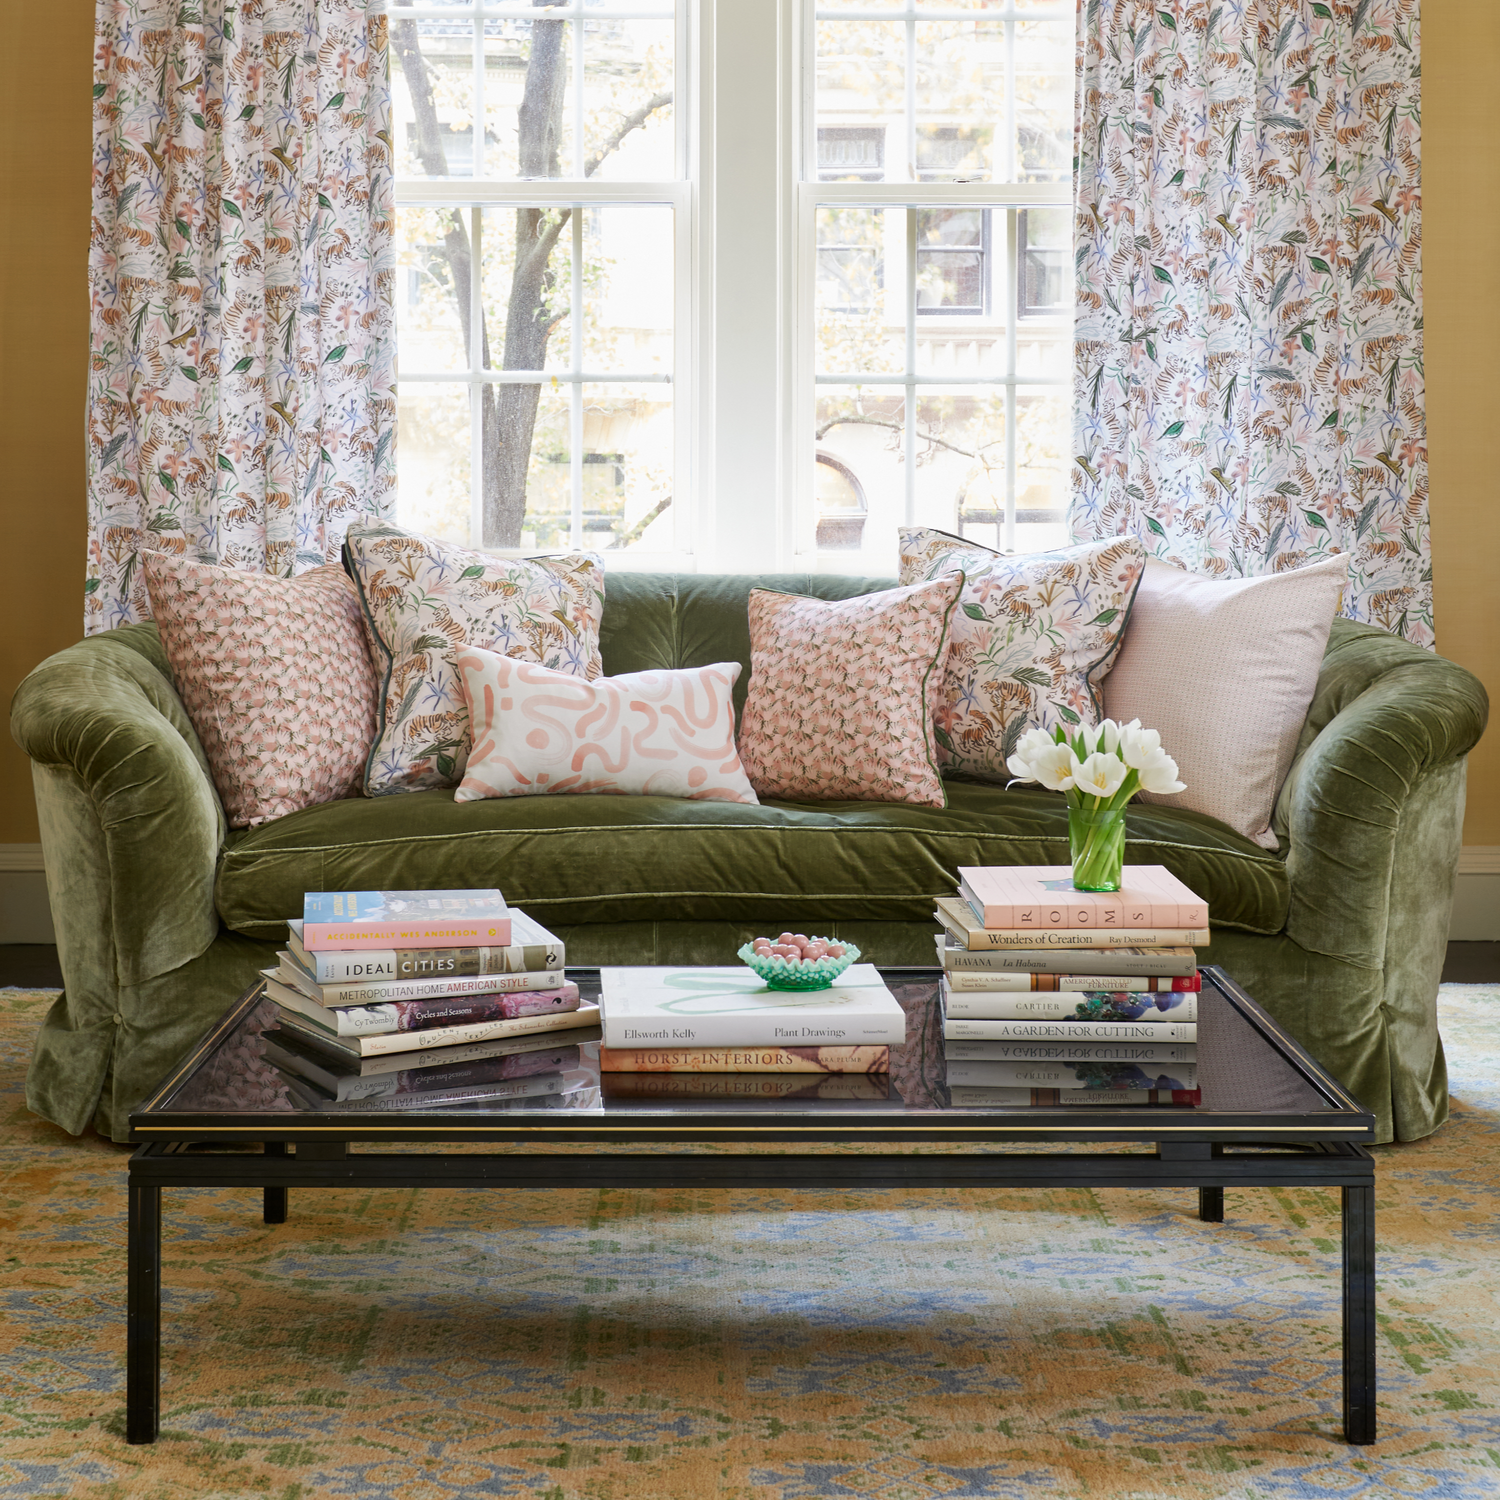 Living room styled with a Pink Geometric printed pillow, Pink Chinoiserie printed pillow, Pink Floral printed pillow, and Pink Graphic printed lumbar on Fern Green Velvet couch by coffee table with stacked books and white tulips in vase in front of an illuminated window with Pink Chinoiserie Tiger printed curtains